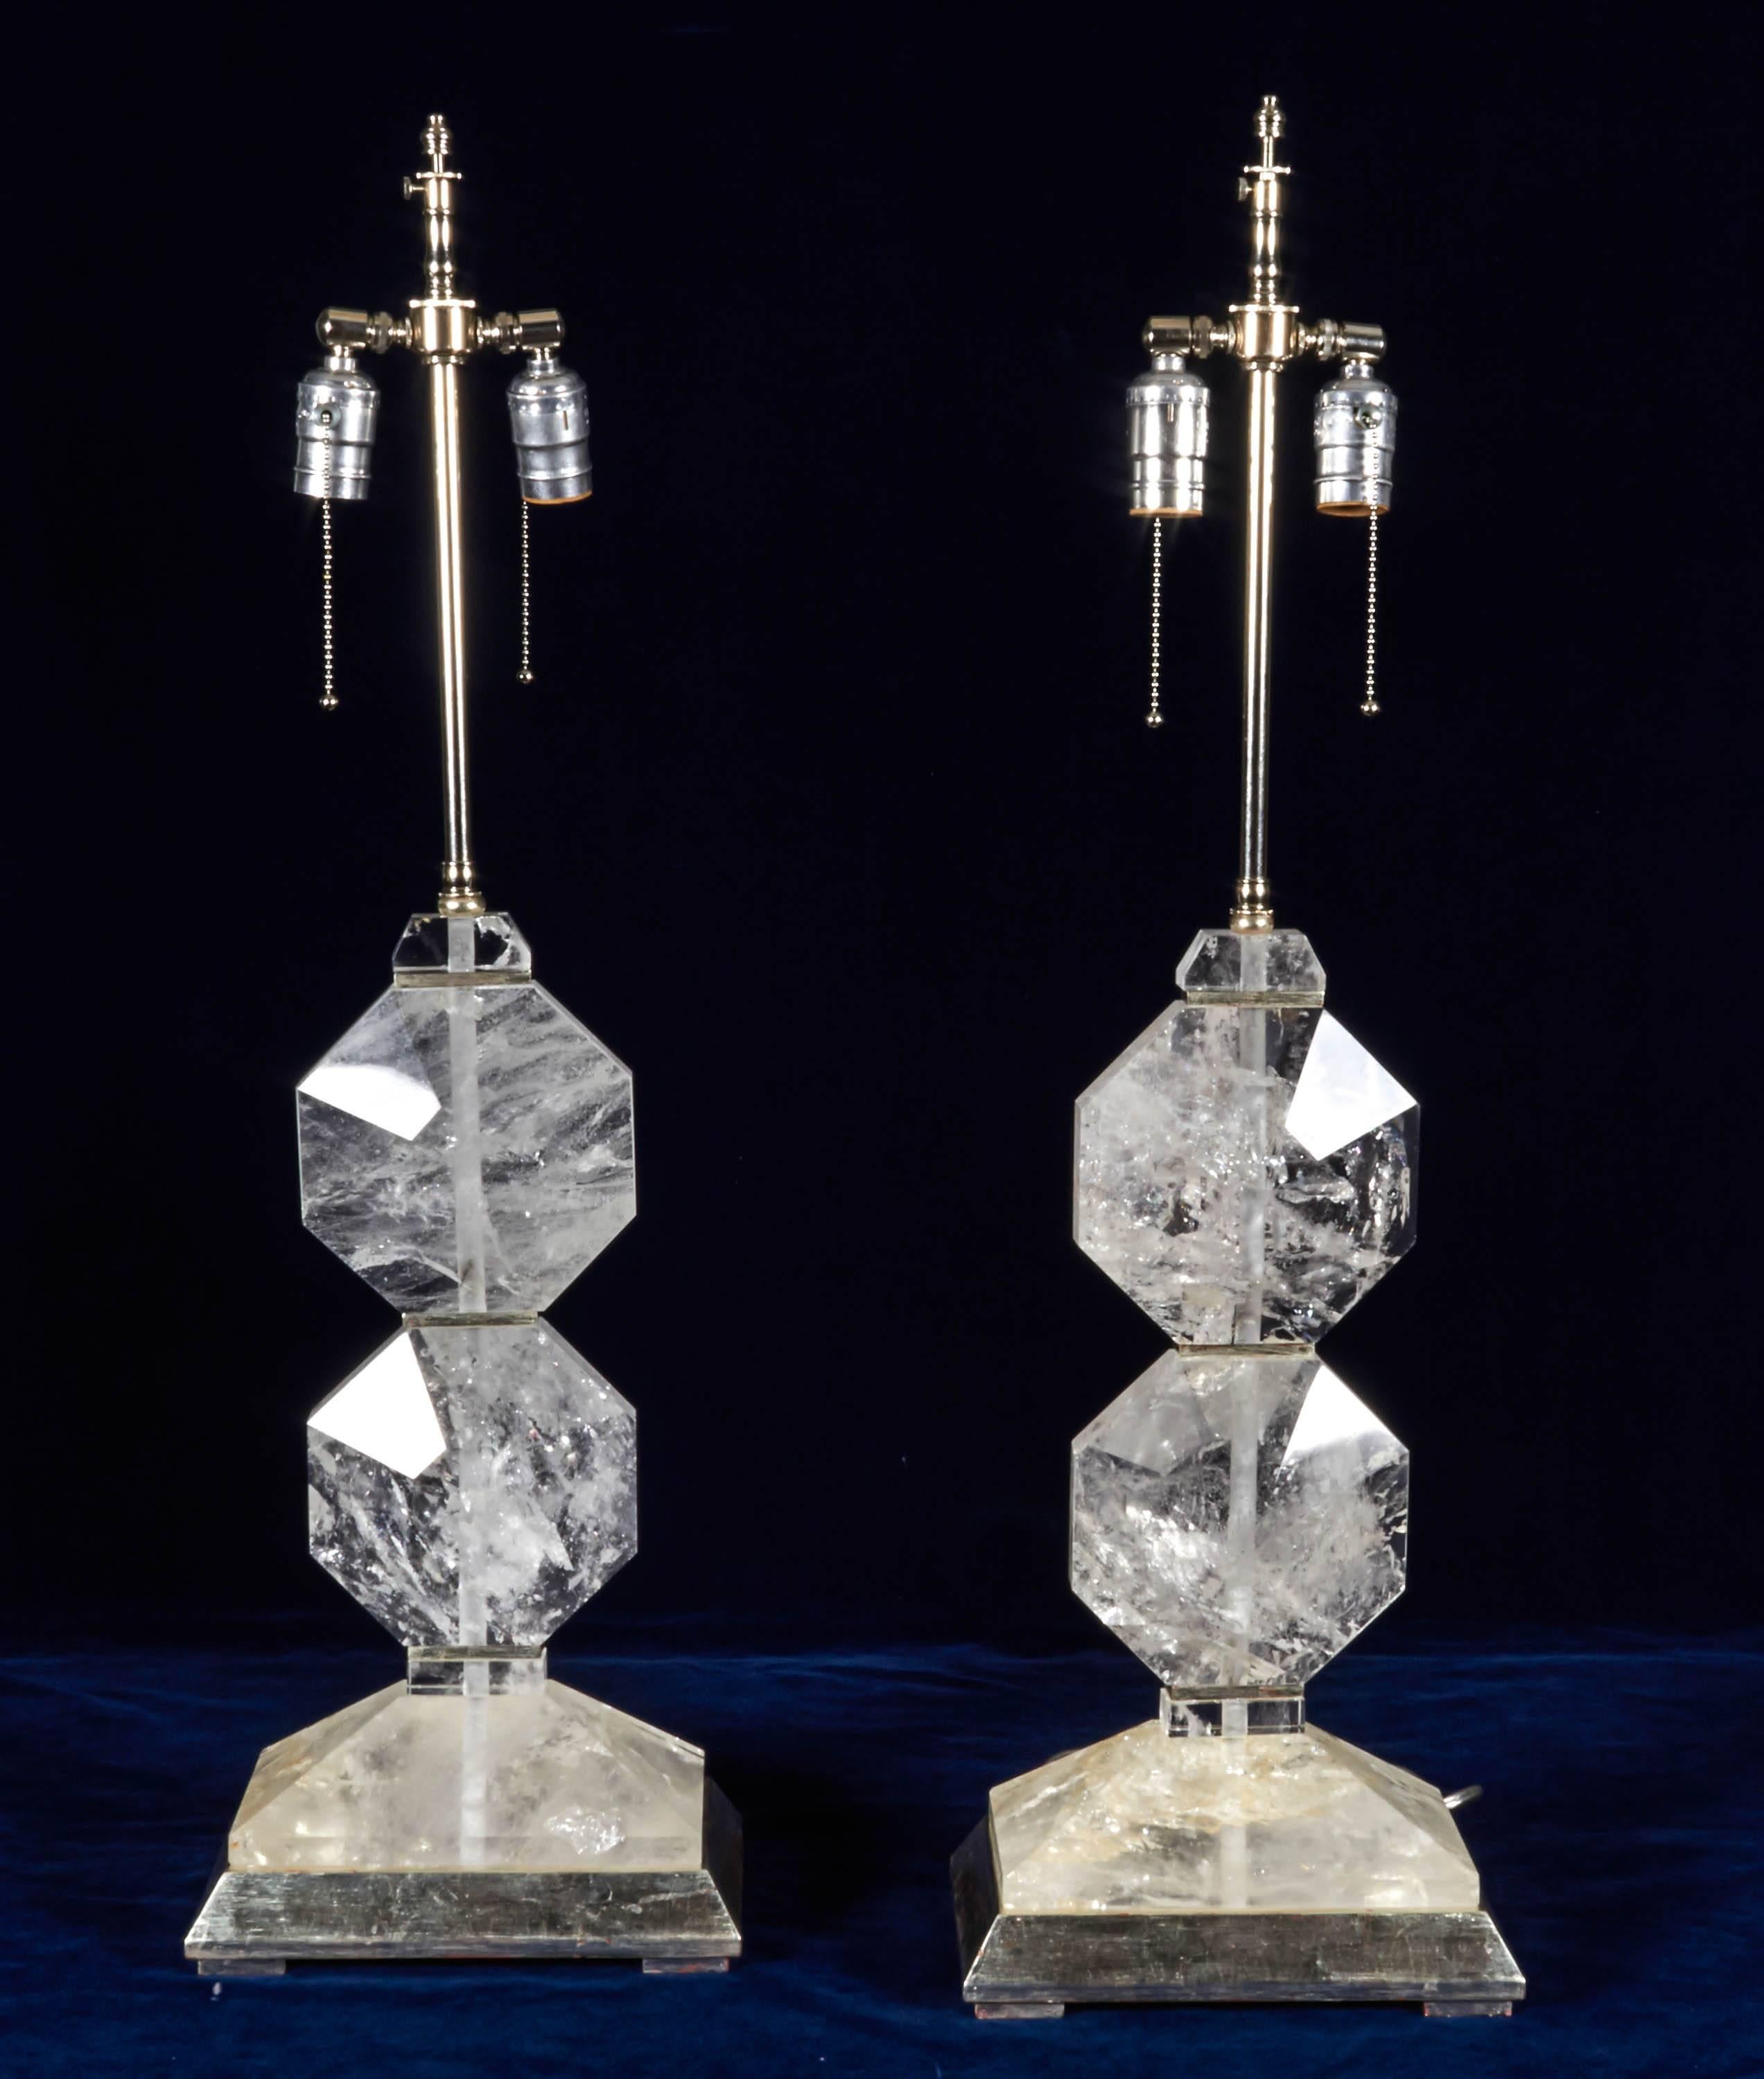 A fine pair of French Art Deco style, hand diamond cut and faceted rock crystal lamps, mounted on rectangular shaped platinum bases. In the style of Maison Jansen.

The height without electrical fitting is 18.5